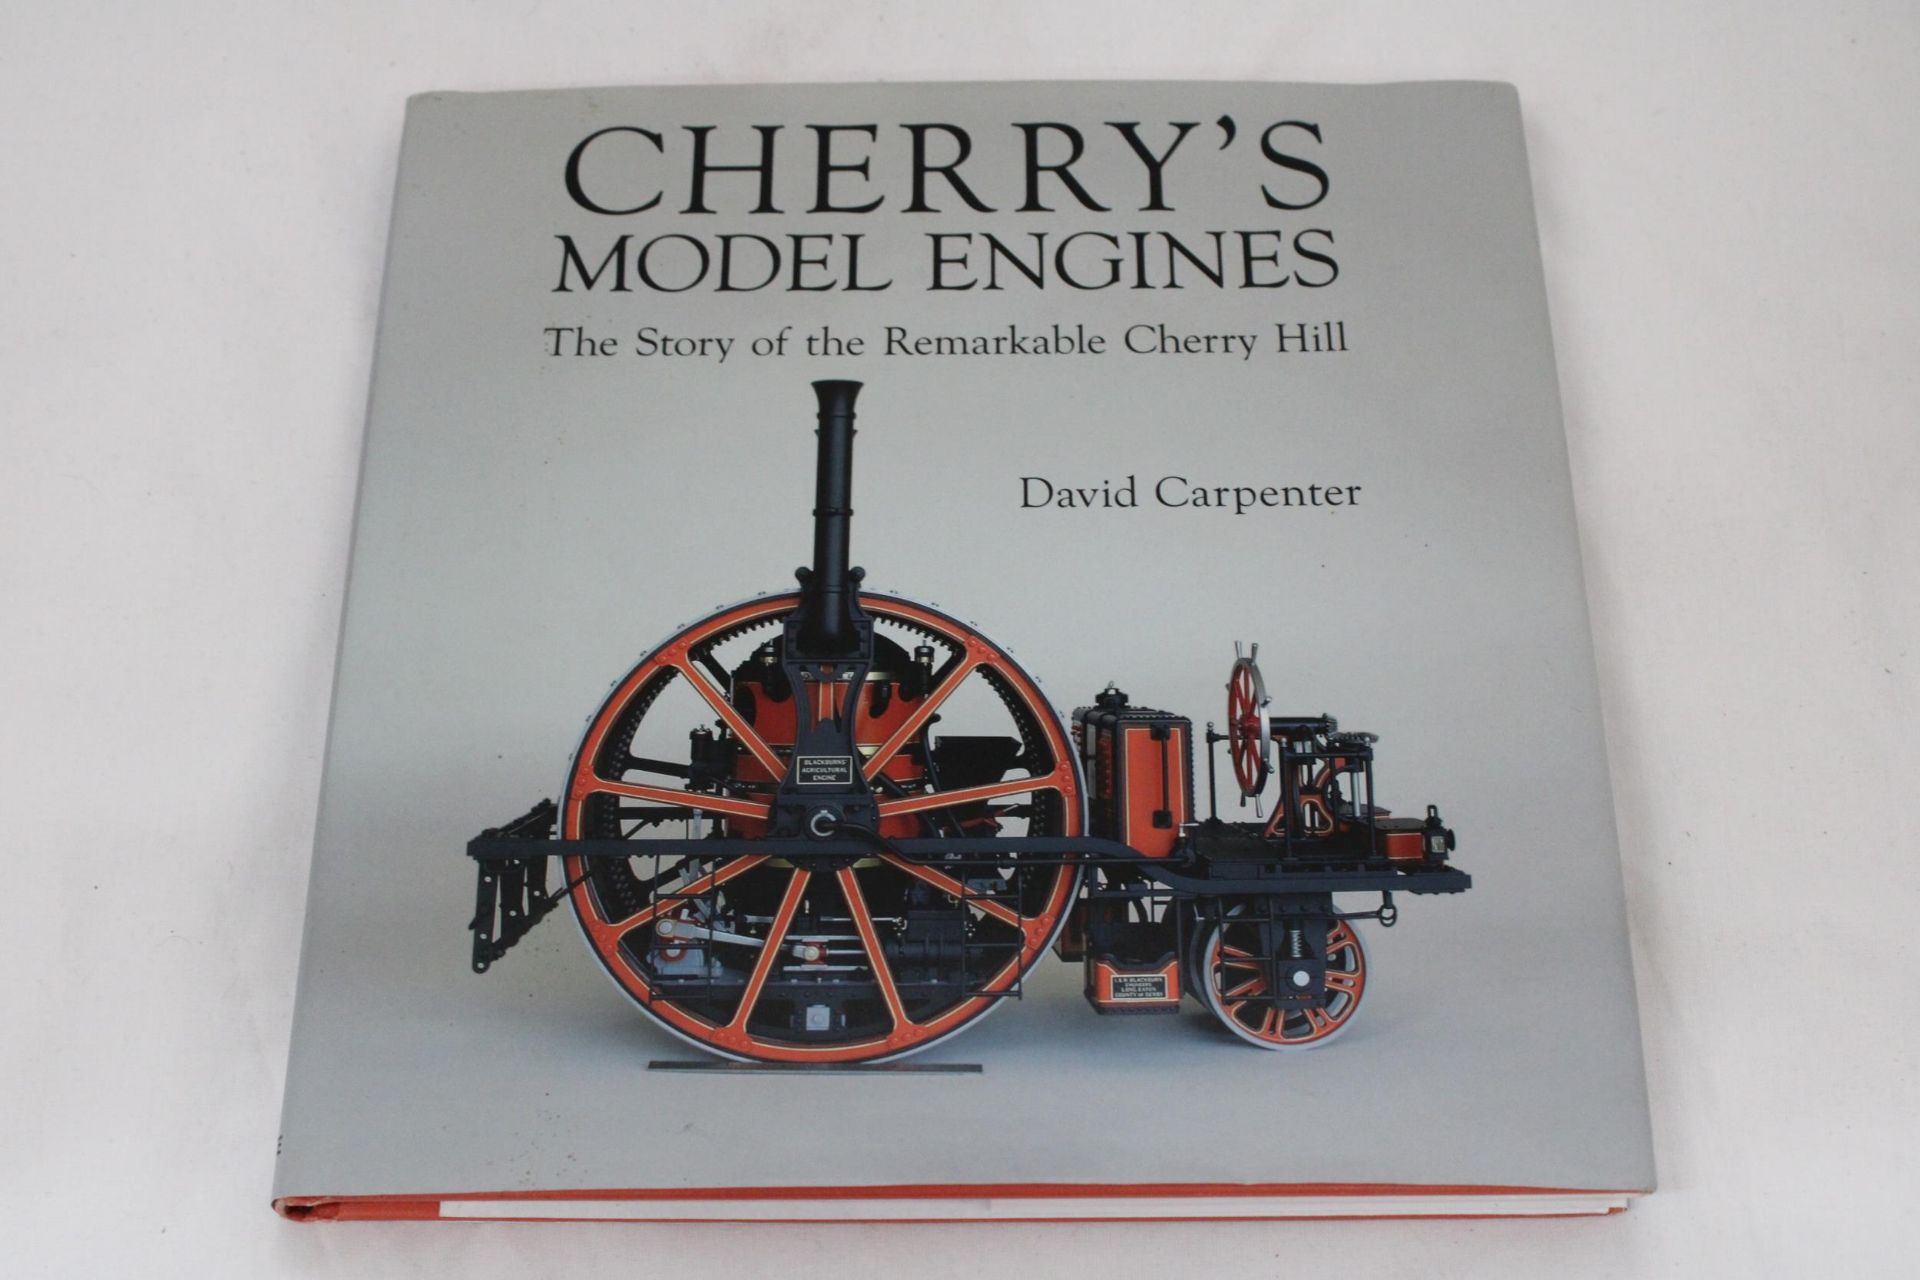 A HARDBACK COPY OF 'CHERRY'S MODEL ENGINES', THE STORY OF THE REMARKABLE CHERRY HILL